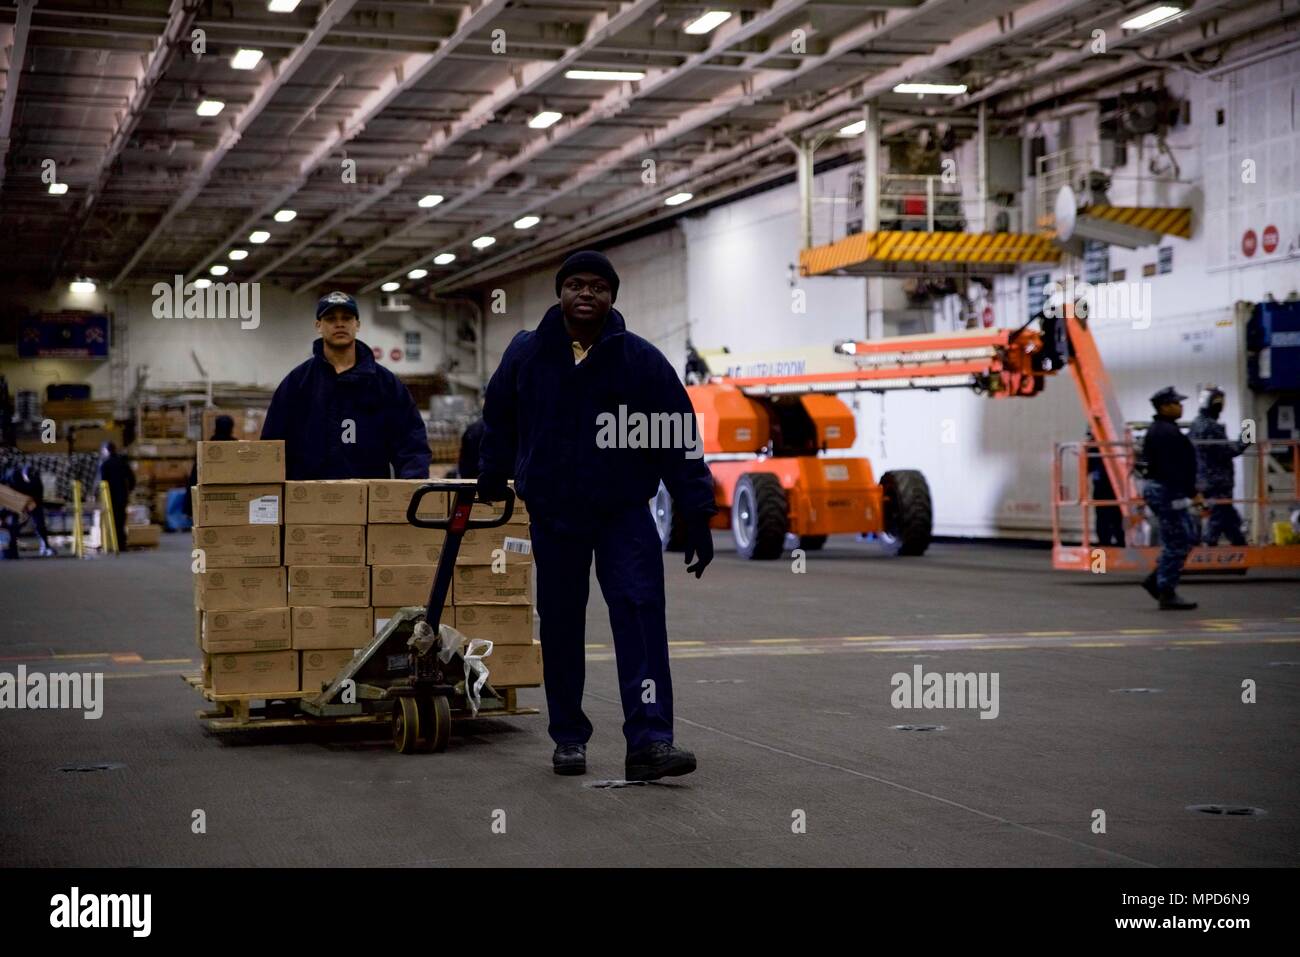 170204-N-IE397-002  NORFOLK, Va. (Feb. 4, 2017) Culinary Specialist Seaman Sodou Amoussi, from Gainesville, Ga., right, and Culinary Specialist Seaman Jonathan Mcleod-Peters transport supplies across the hangar bay of the aircraft carrier USS Dwight D. Eisenhower (CVN 69) (Ike). Ike is currently conducting aircraft carrier qualifications during the Sustainment Phase of the Optimized Fleet Response Plan (OFRP). (U.S. Navy photo by Mass Communication Specialist 3rd Class Christopher A. Michaels) Stock Photo